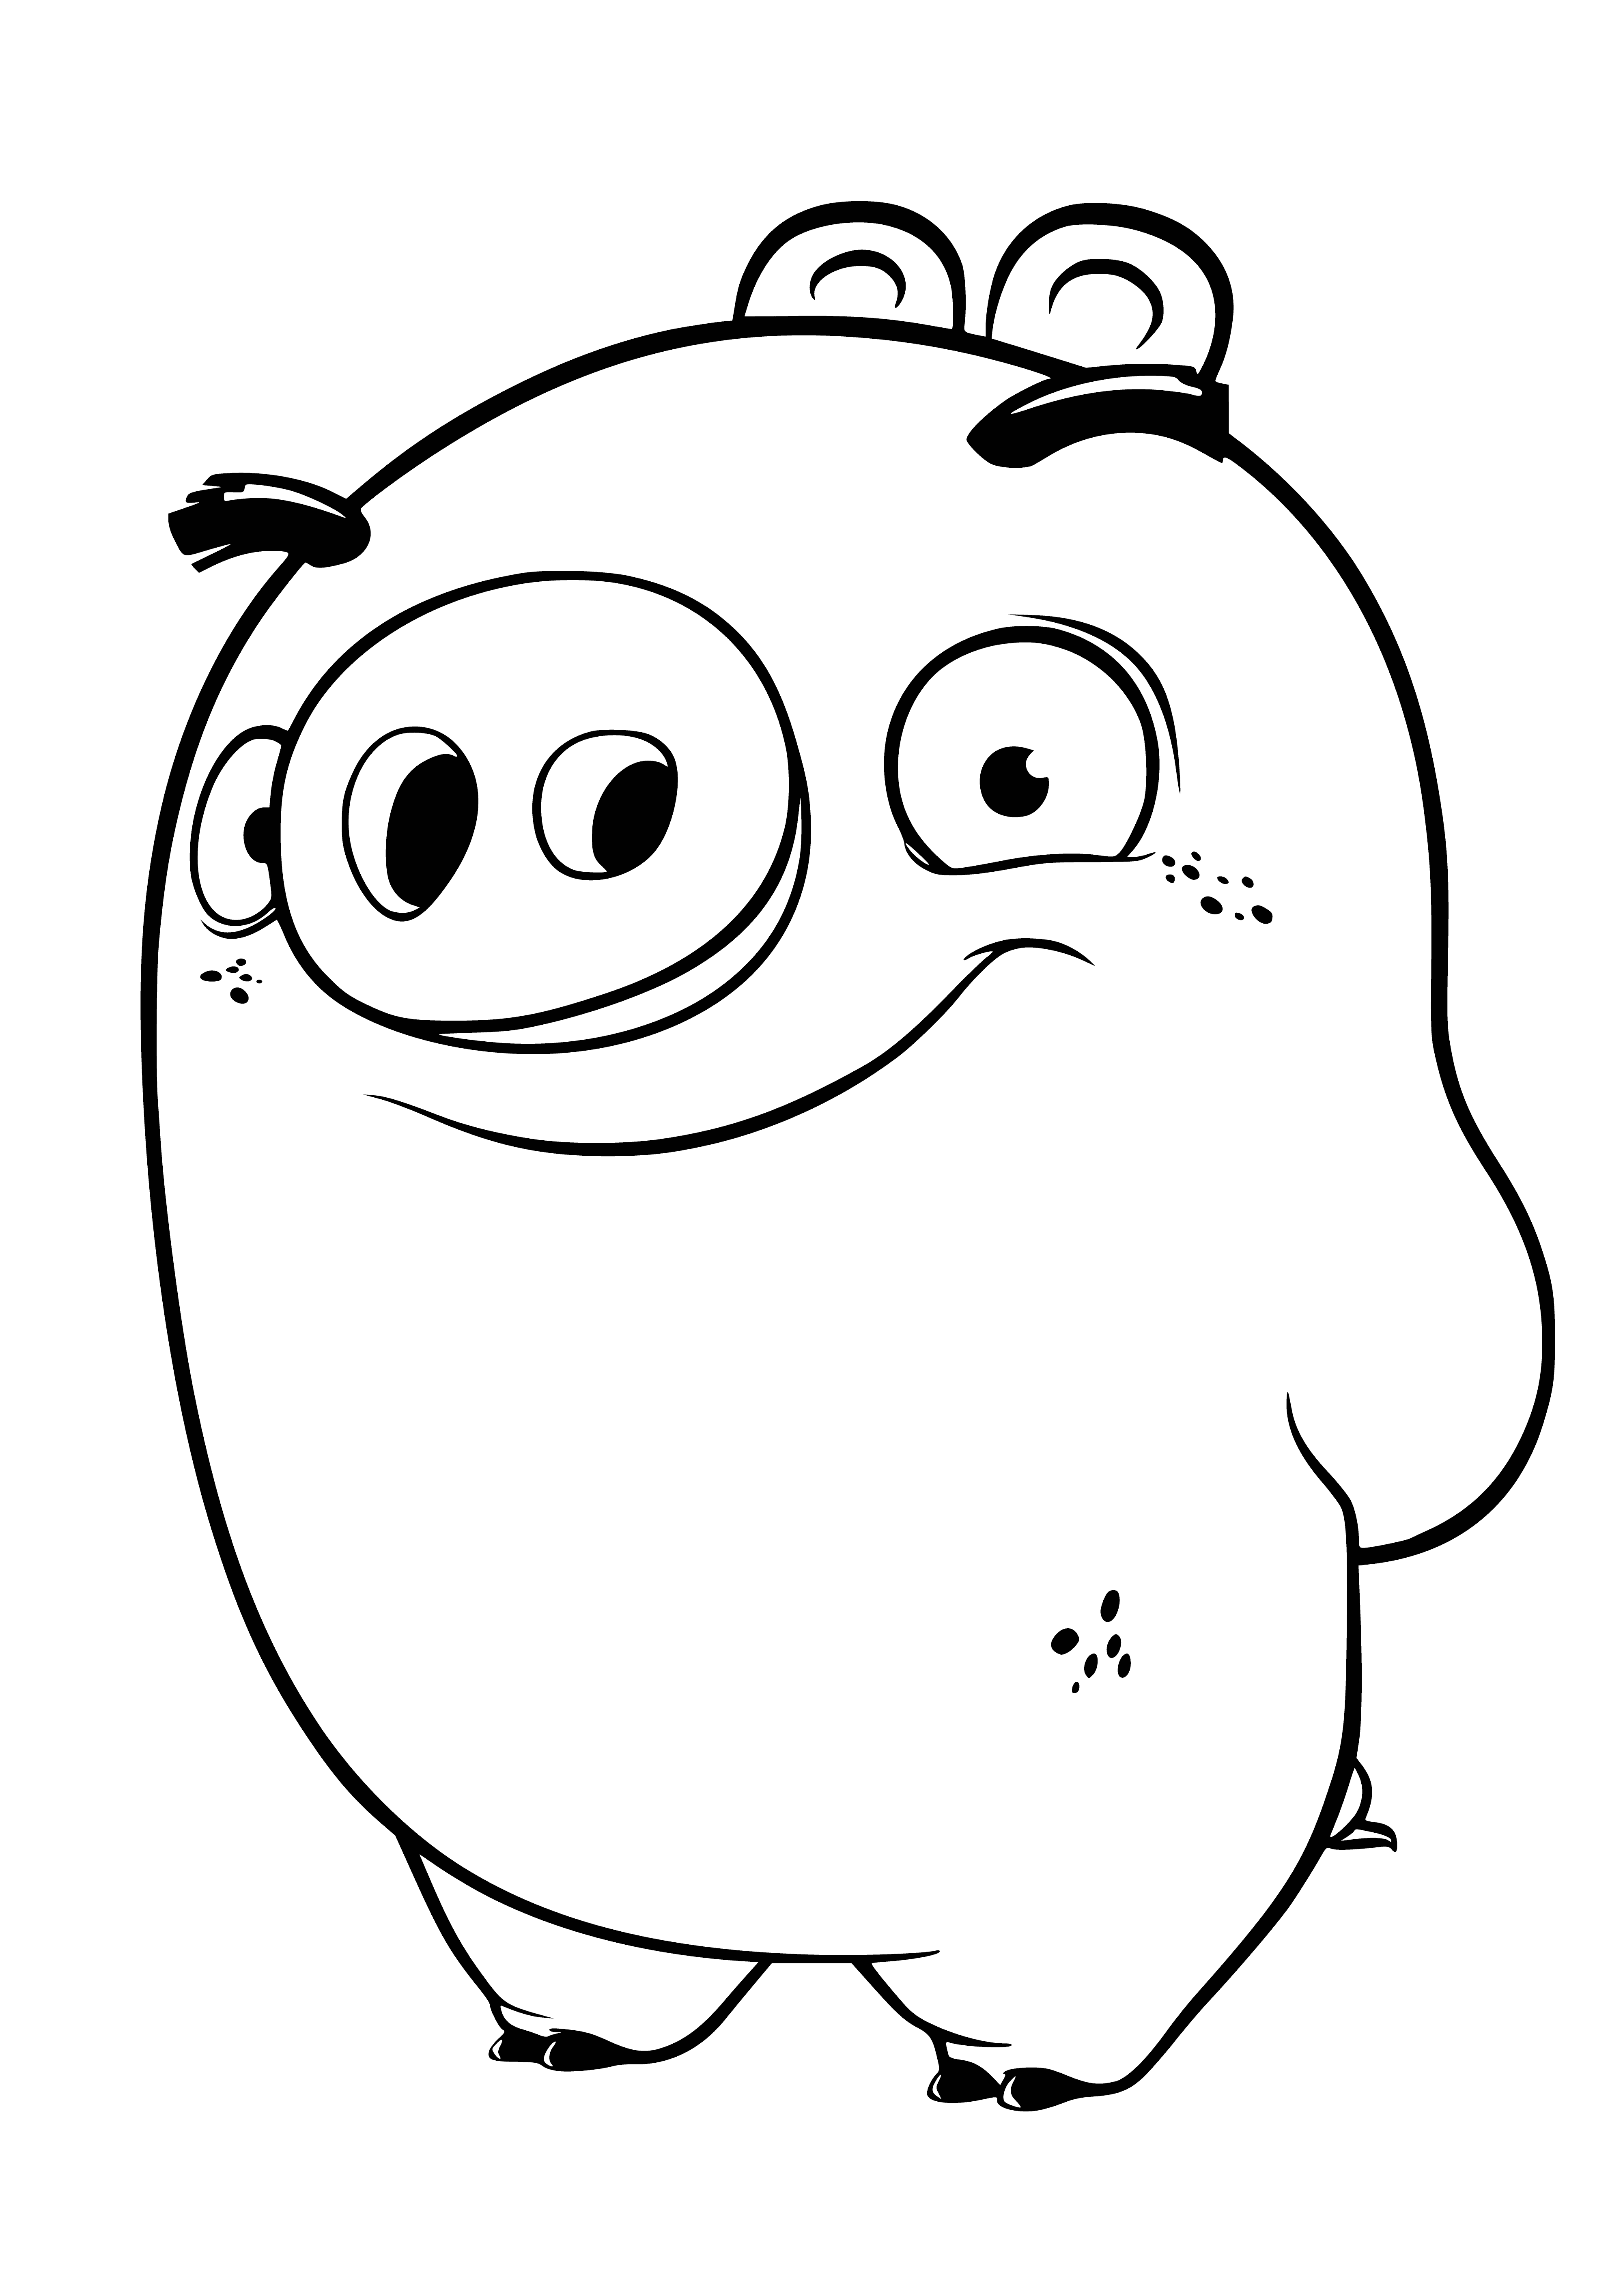 Minion Pig Ross coloring page